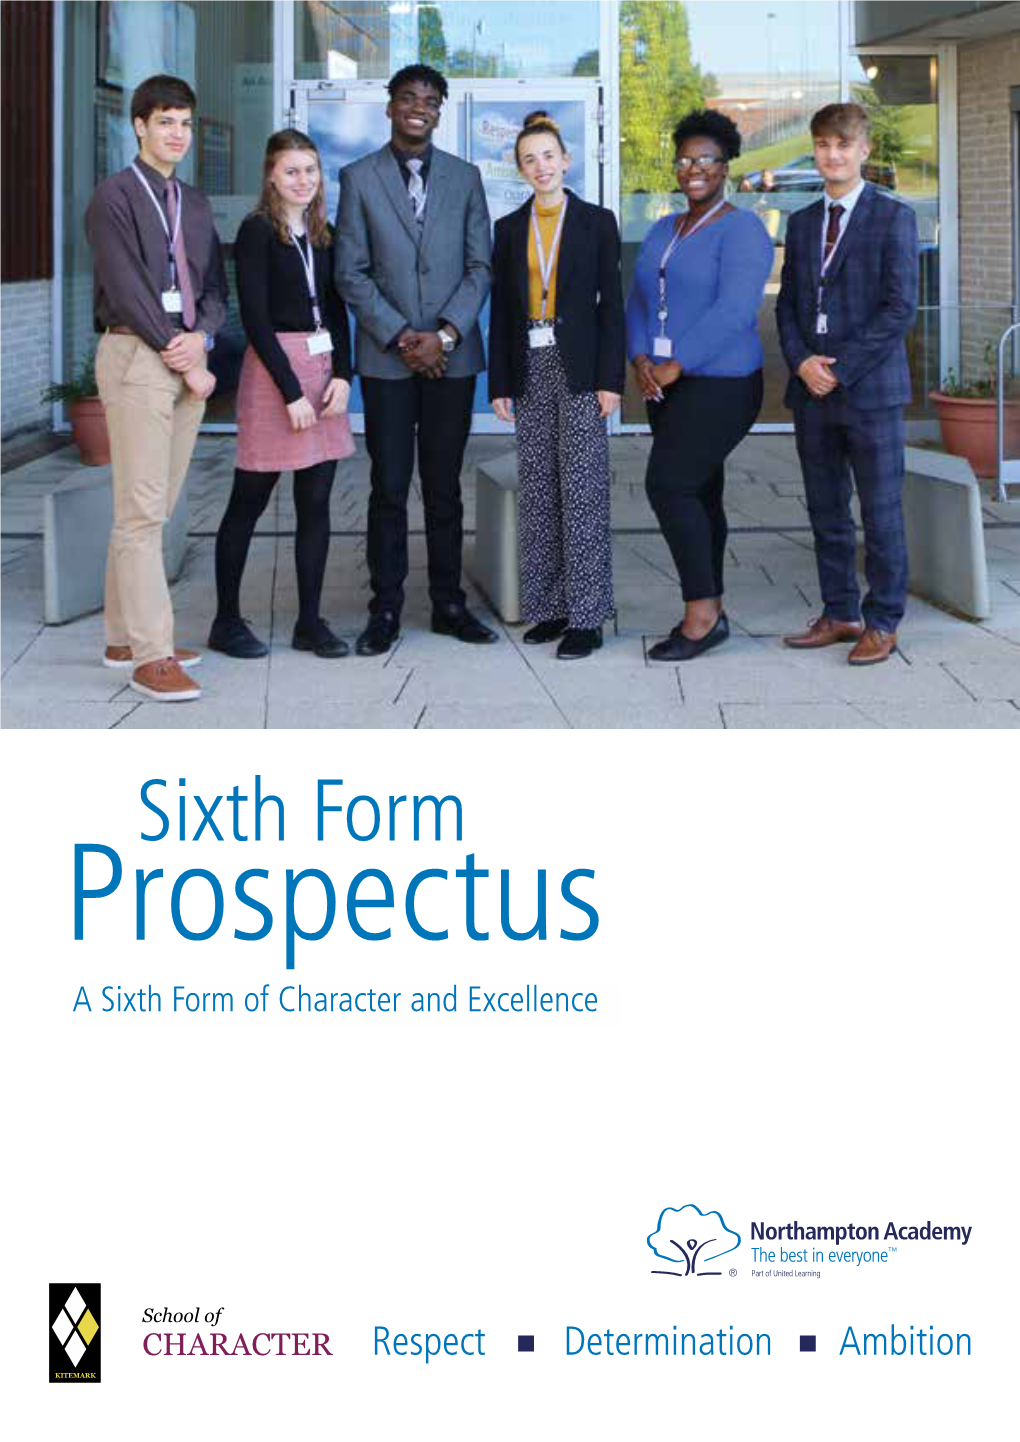 Sixth Form Prospectus a Sixth Form of Character and Excellence